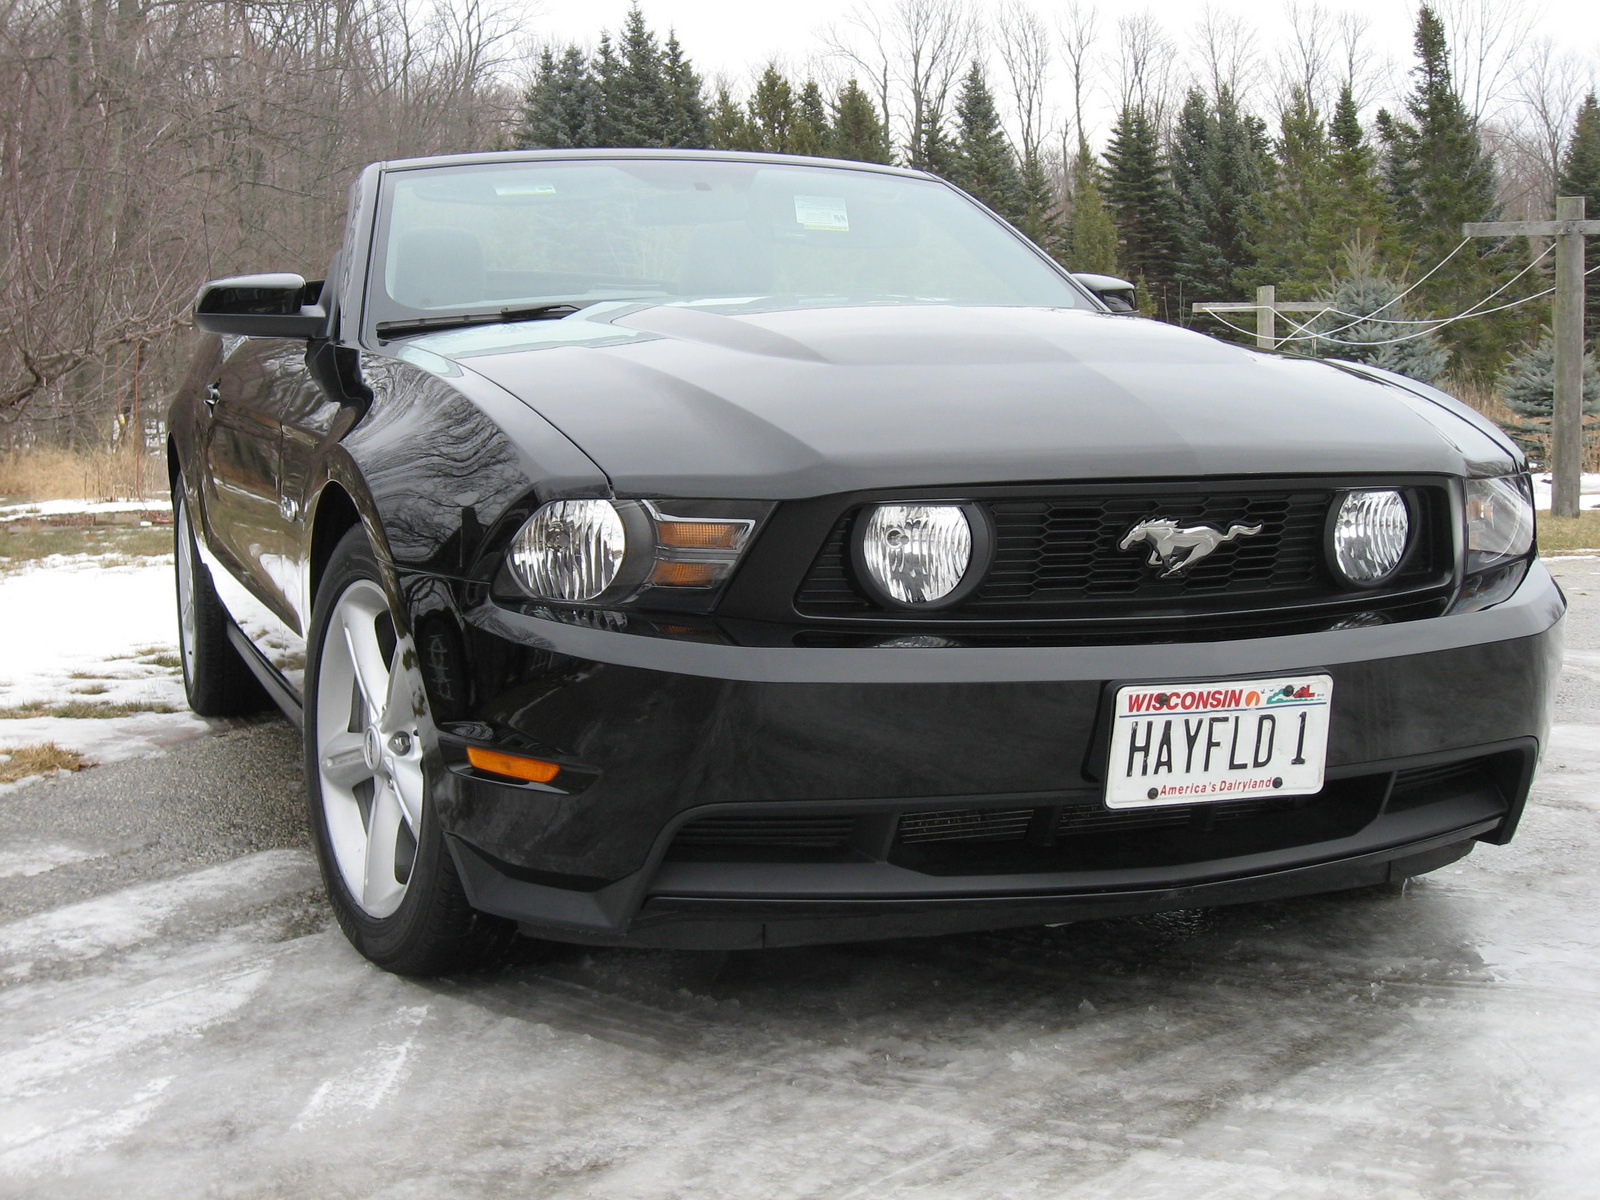 2005 Ford mustang convertible owners manual #3